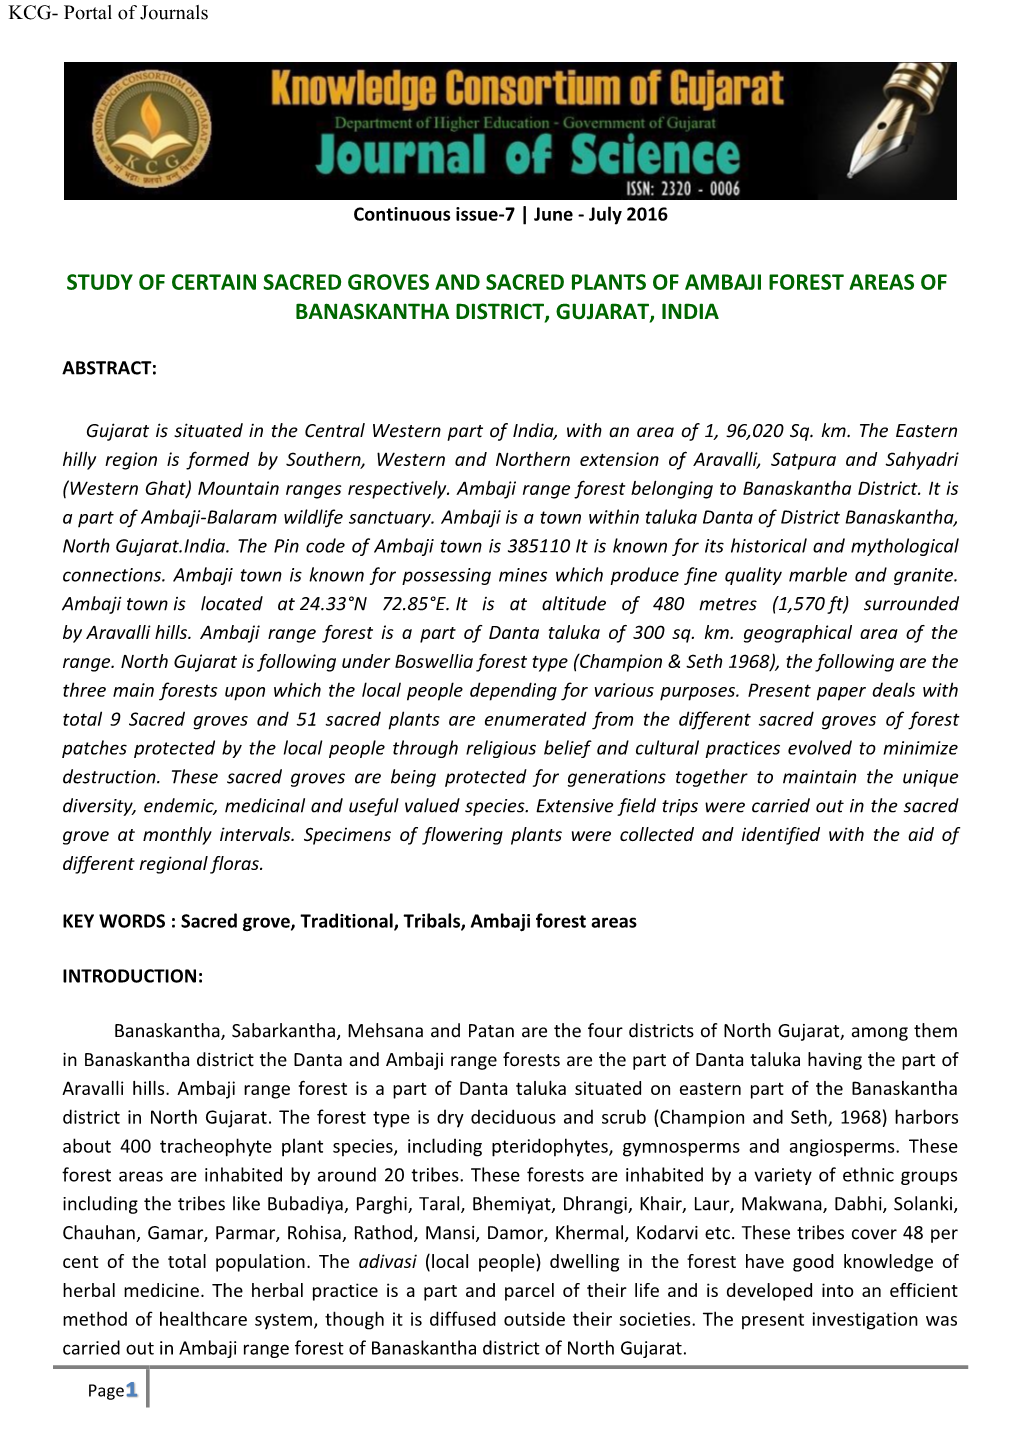 Study of Certain Sacred Groves and Sacred Plants of Ambaji Forest Areas of Banaskantha District, Gujarat, India